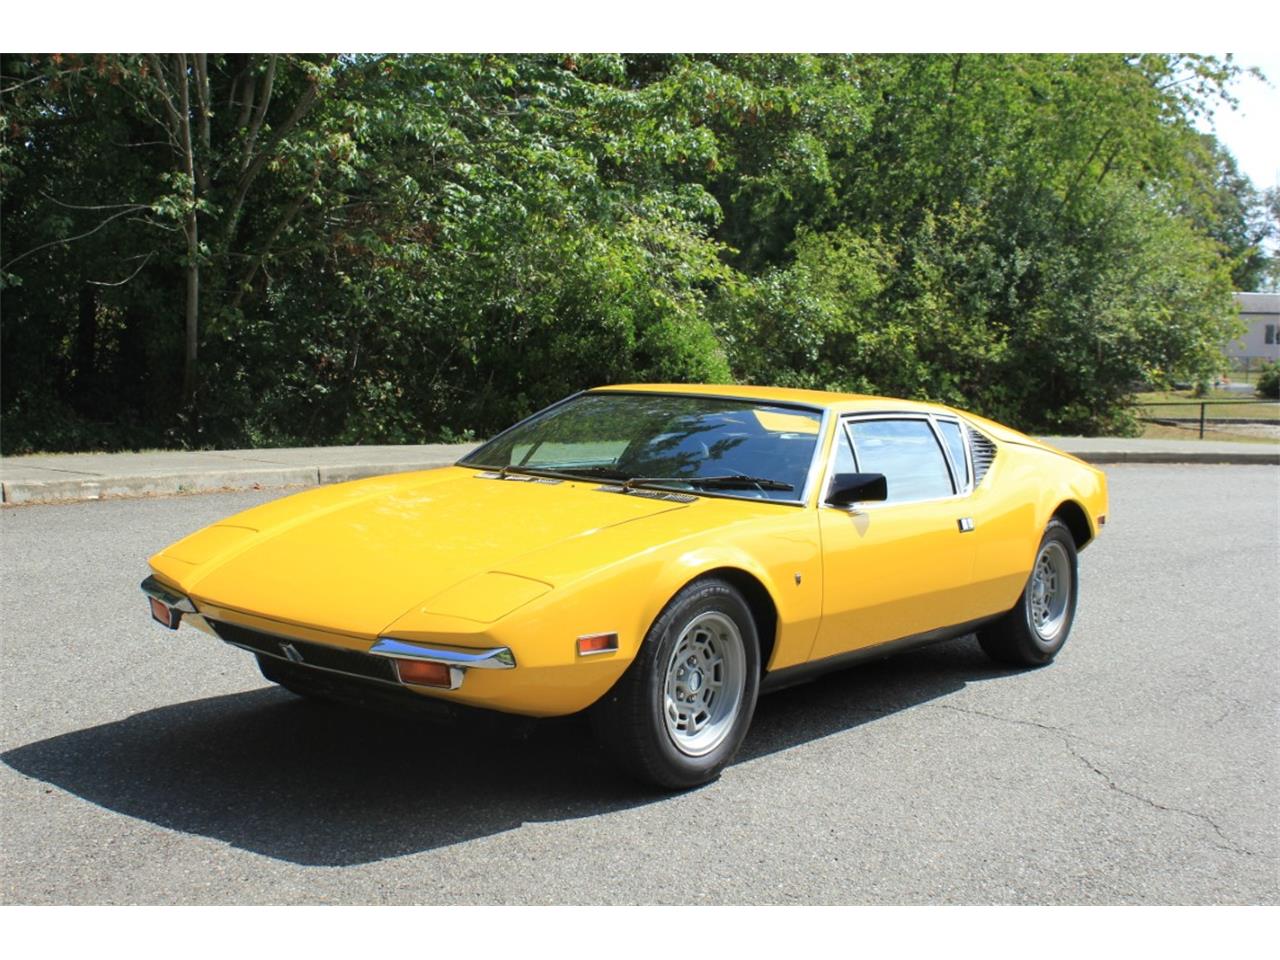 For Sale at Auction: 1971 De Tomaso Pantera for sale in Tacoma, WA